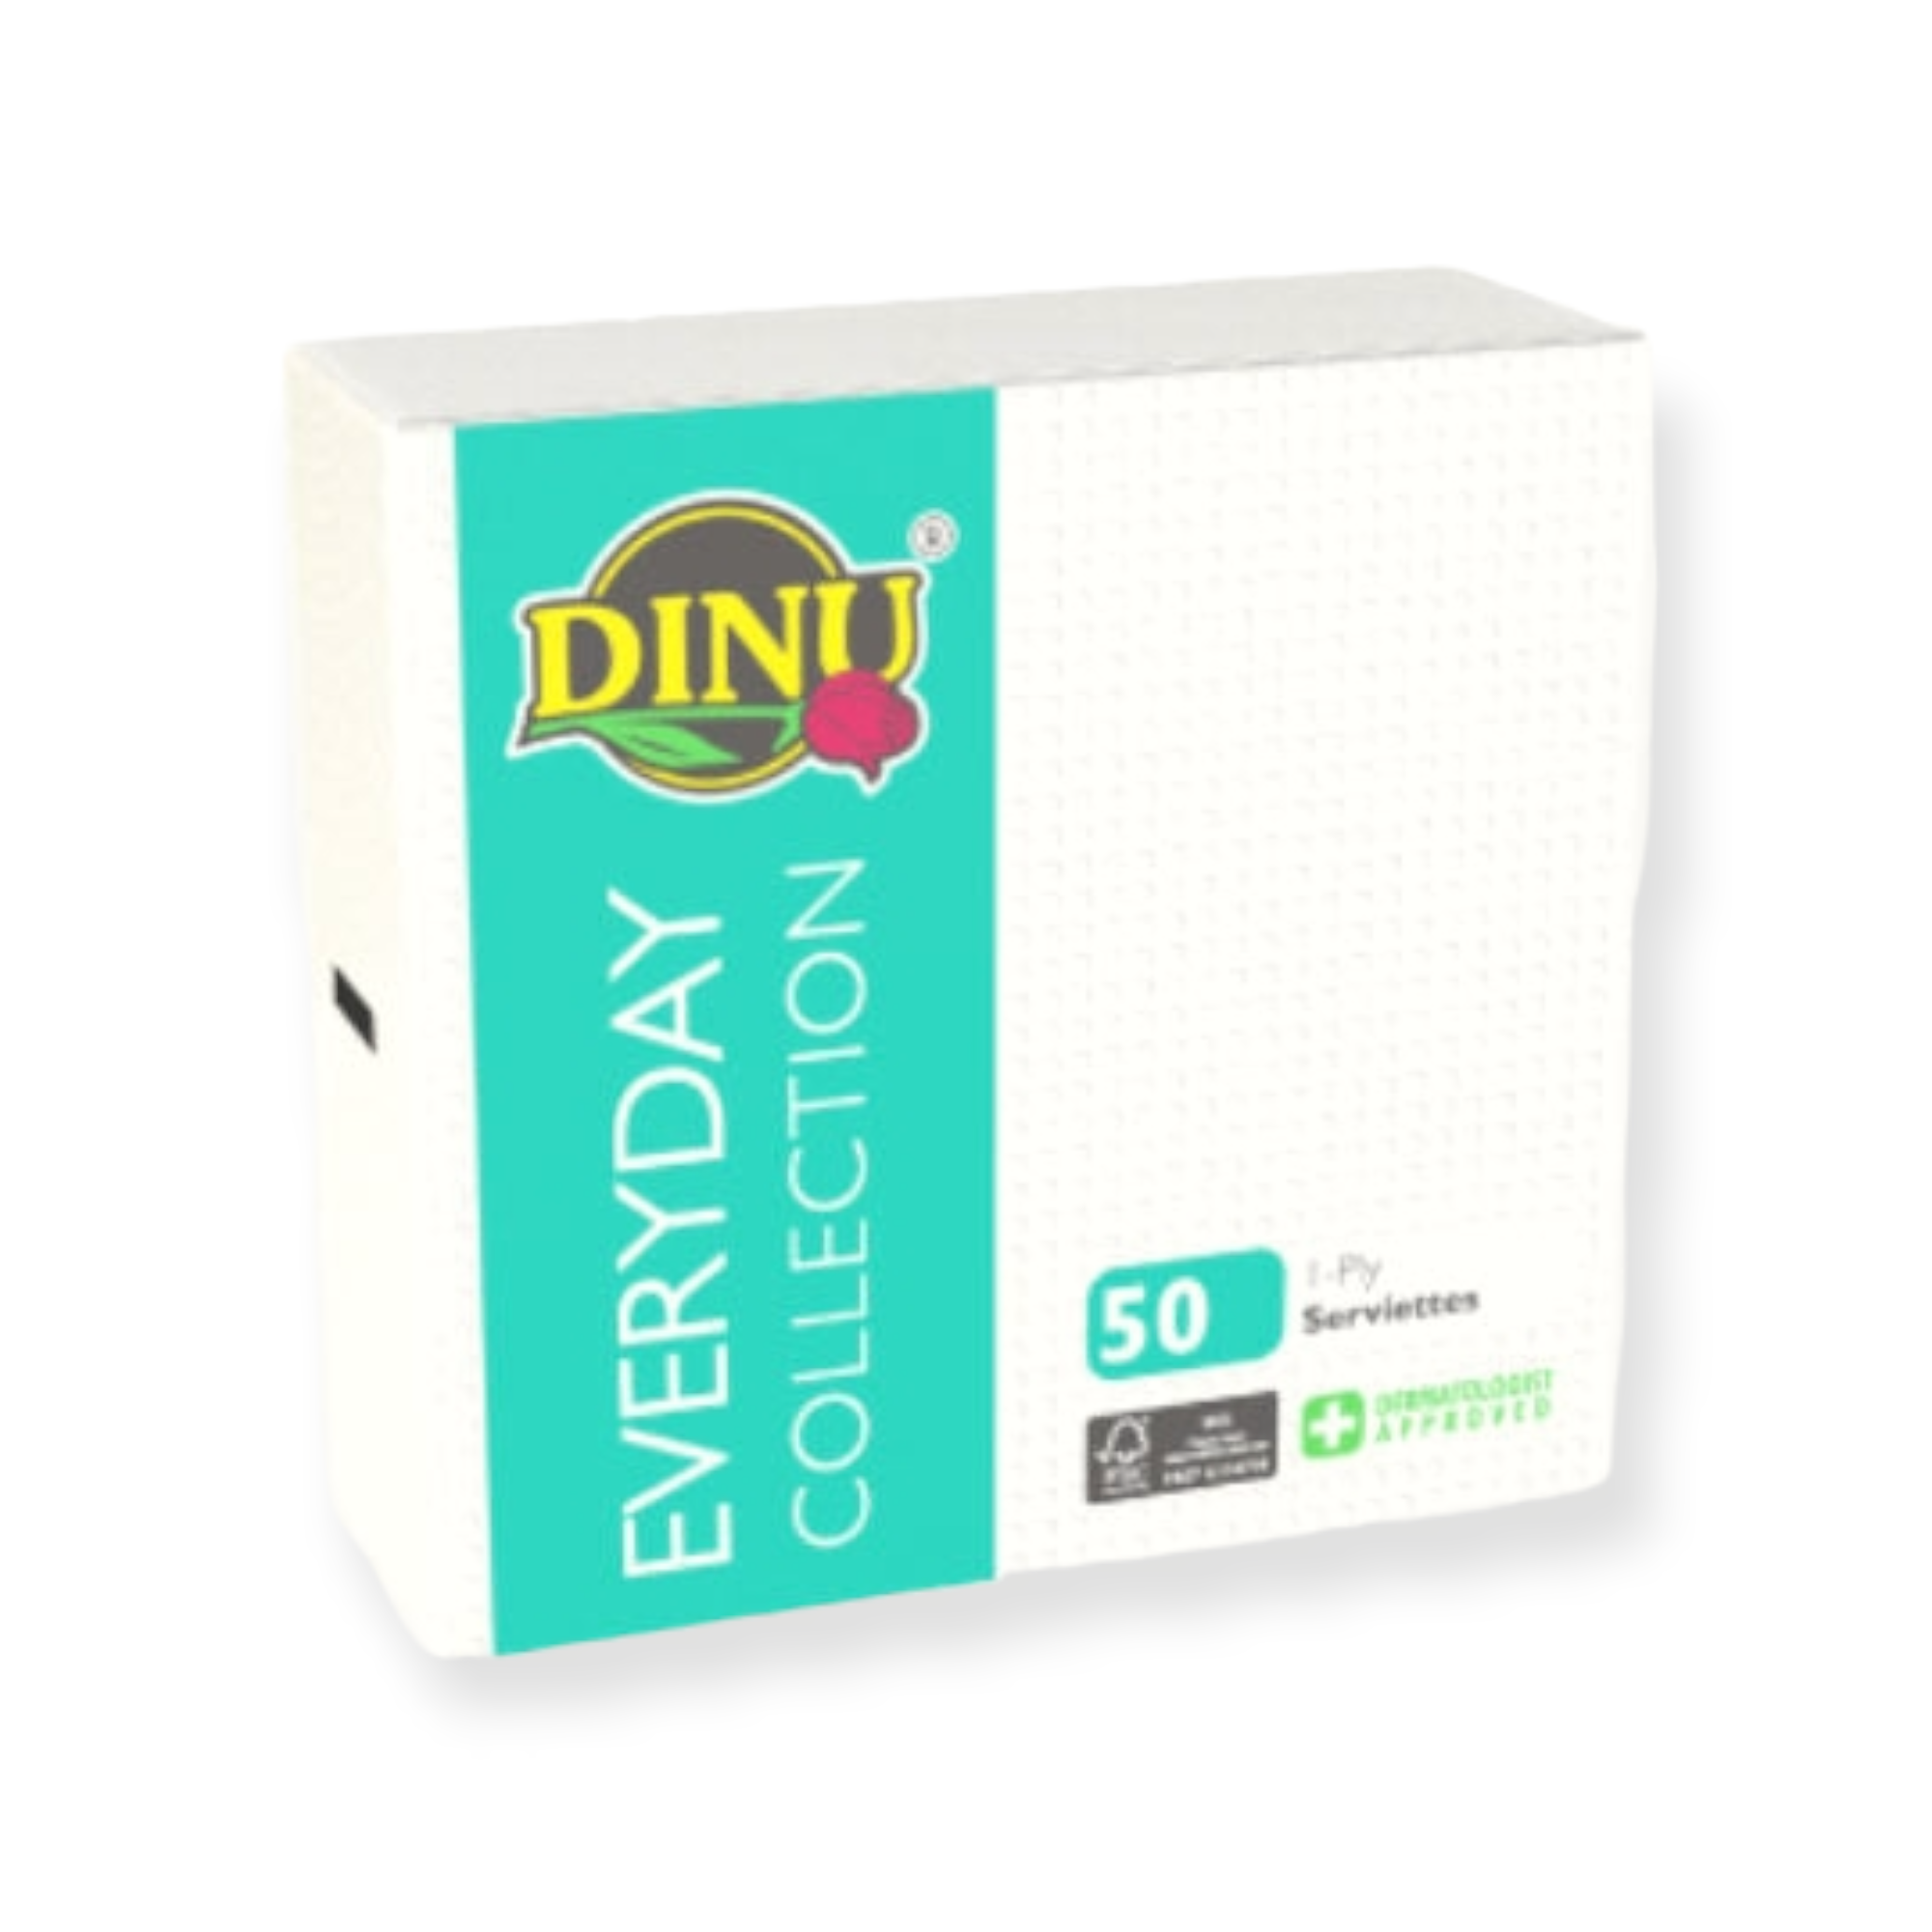 Dinu Serviettes White 1ply 50s - Party Pack Everyday Collection